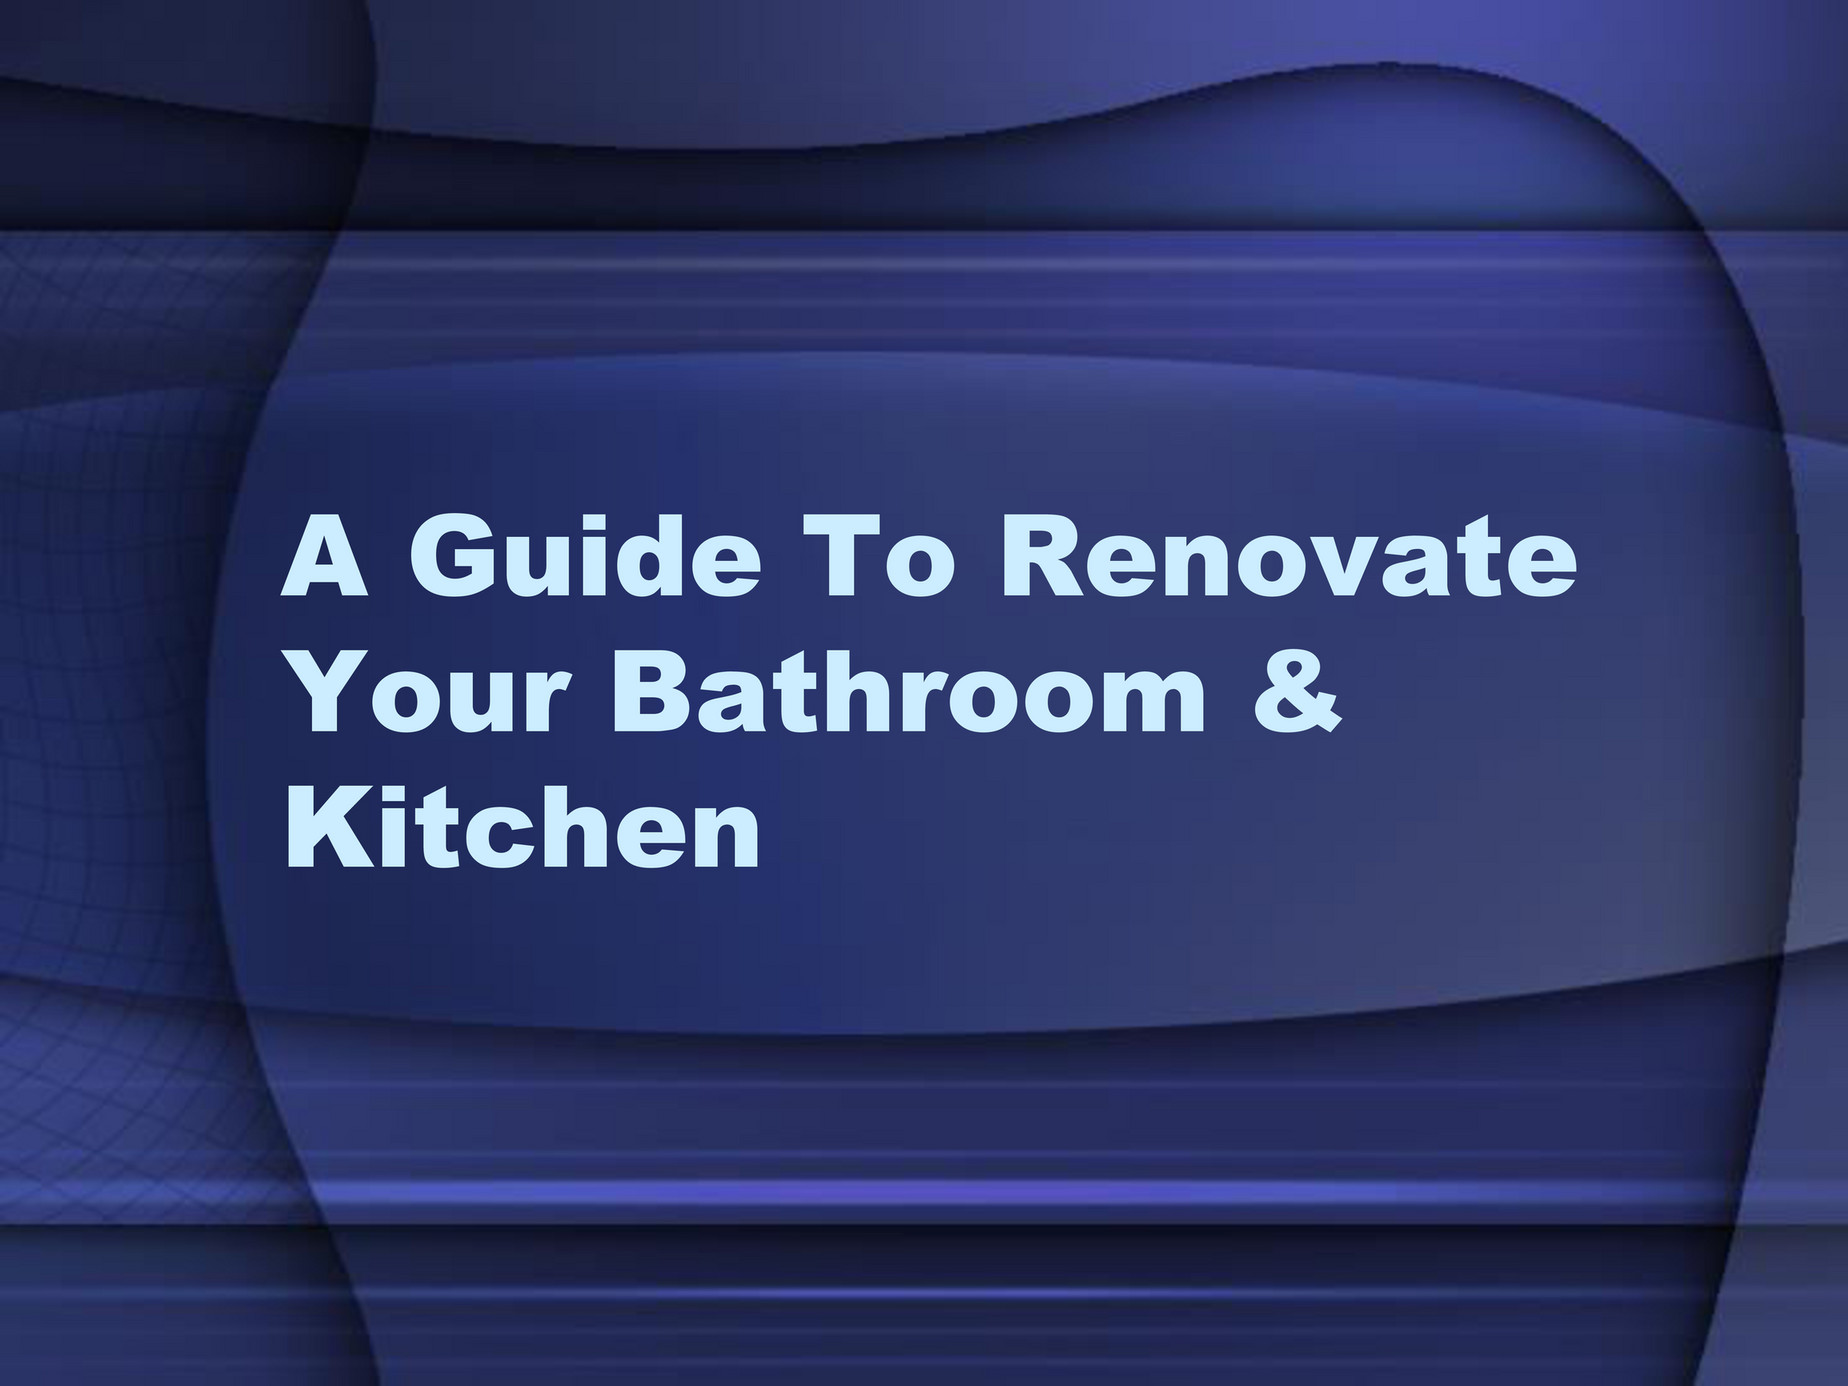 home-renovations-canada-a-guide-to-renovate-your-bathroom-kitchen